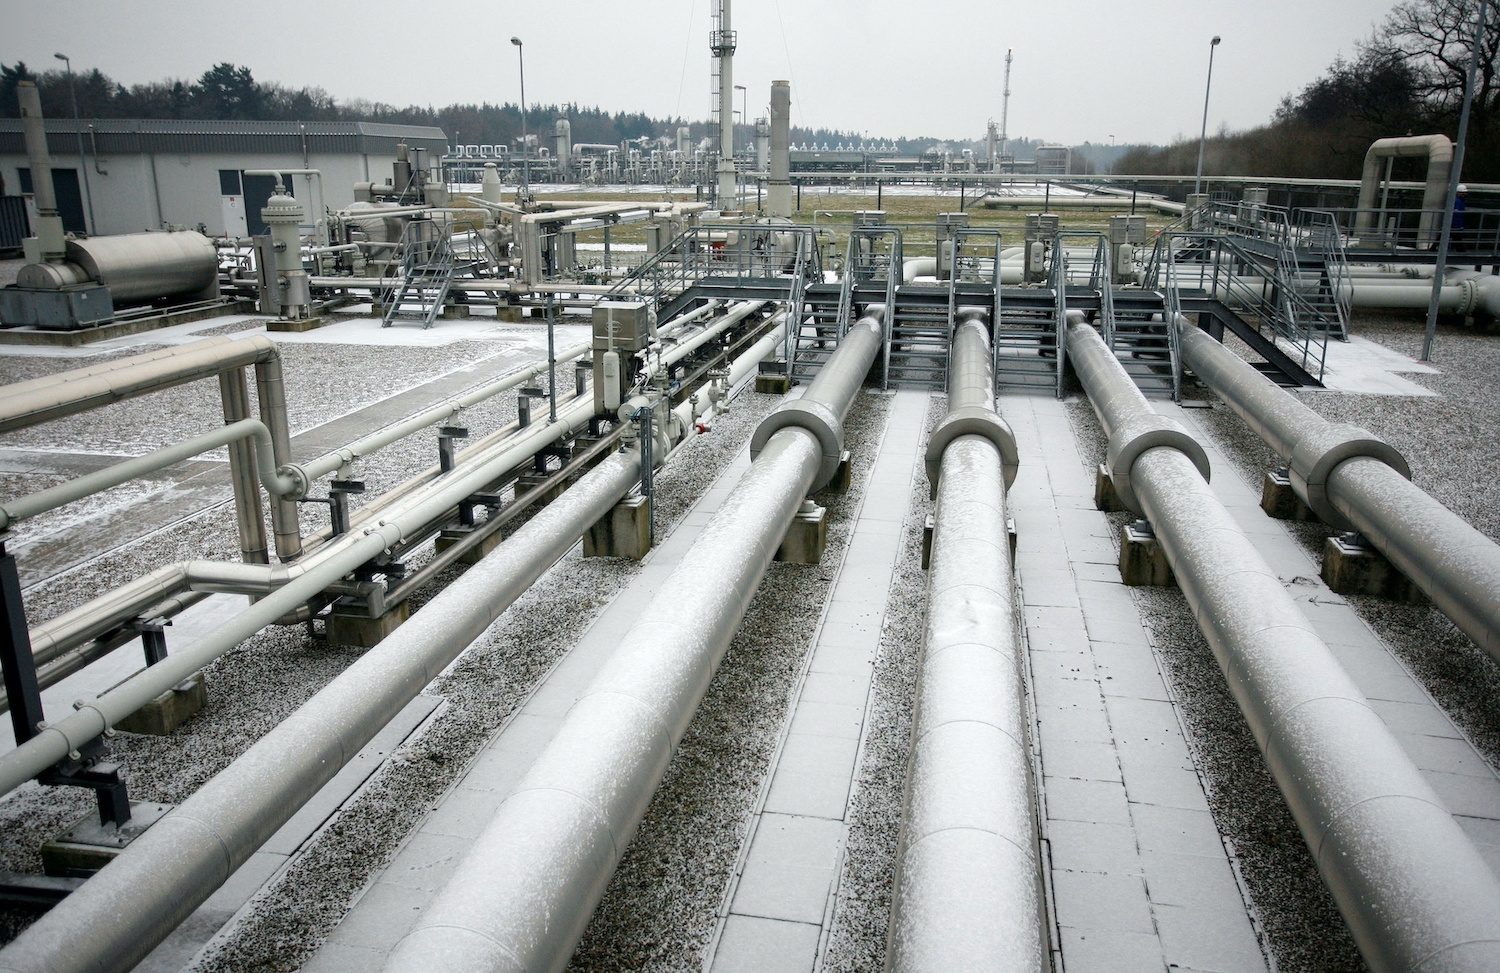 Germany braces for gas rationing in rouble standoff with Russia